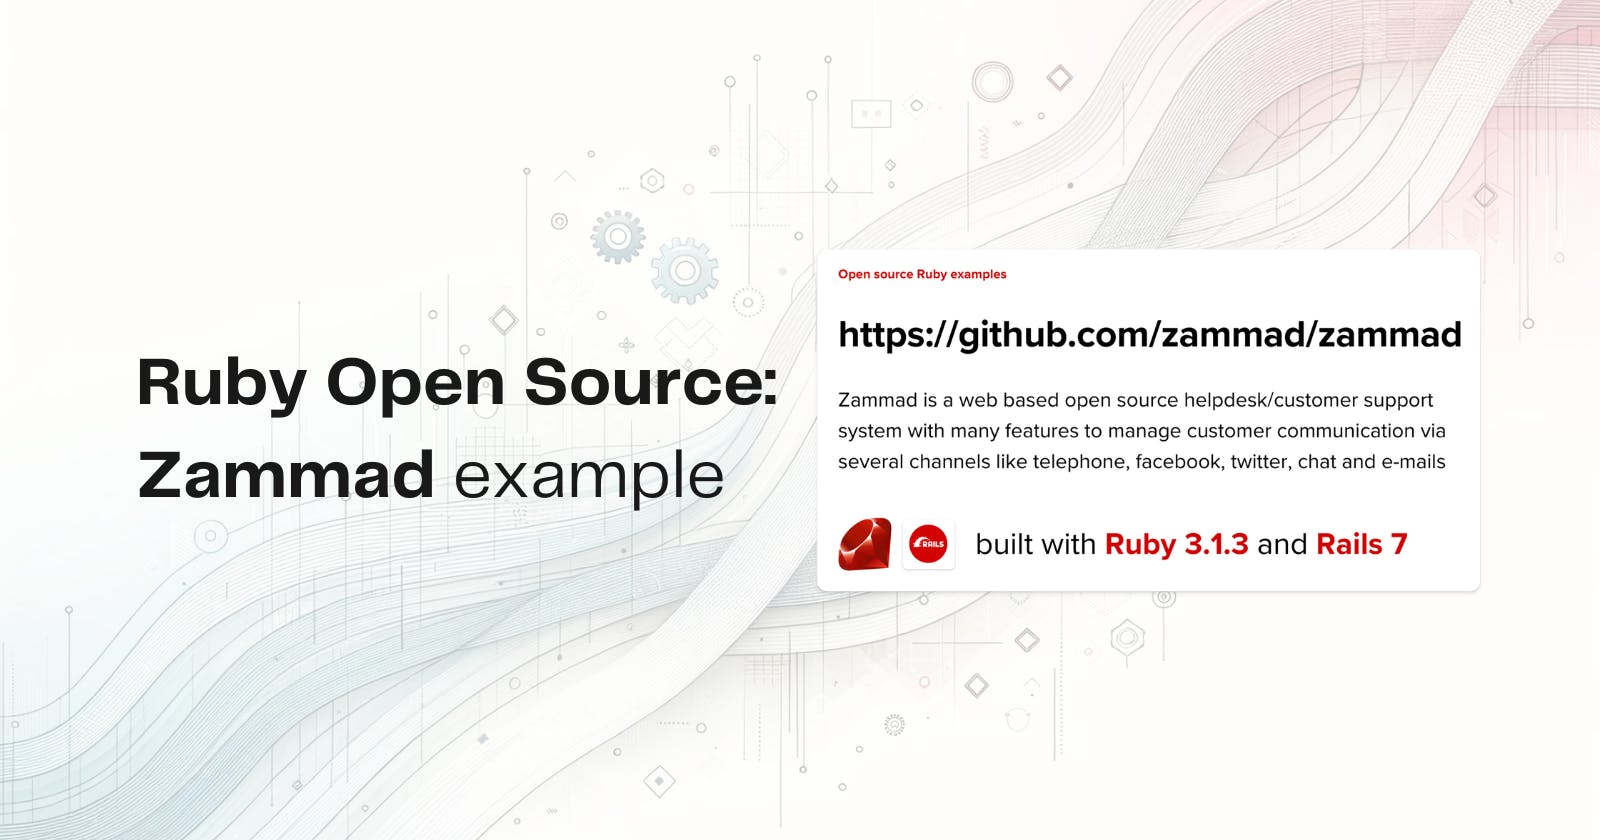 Ruby Open Source: Zammad example